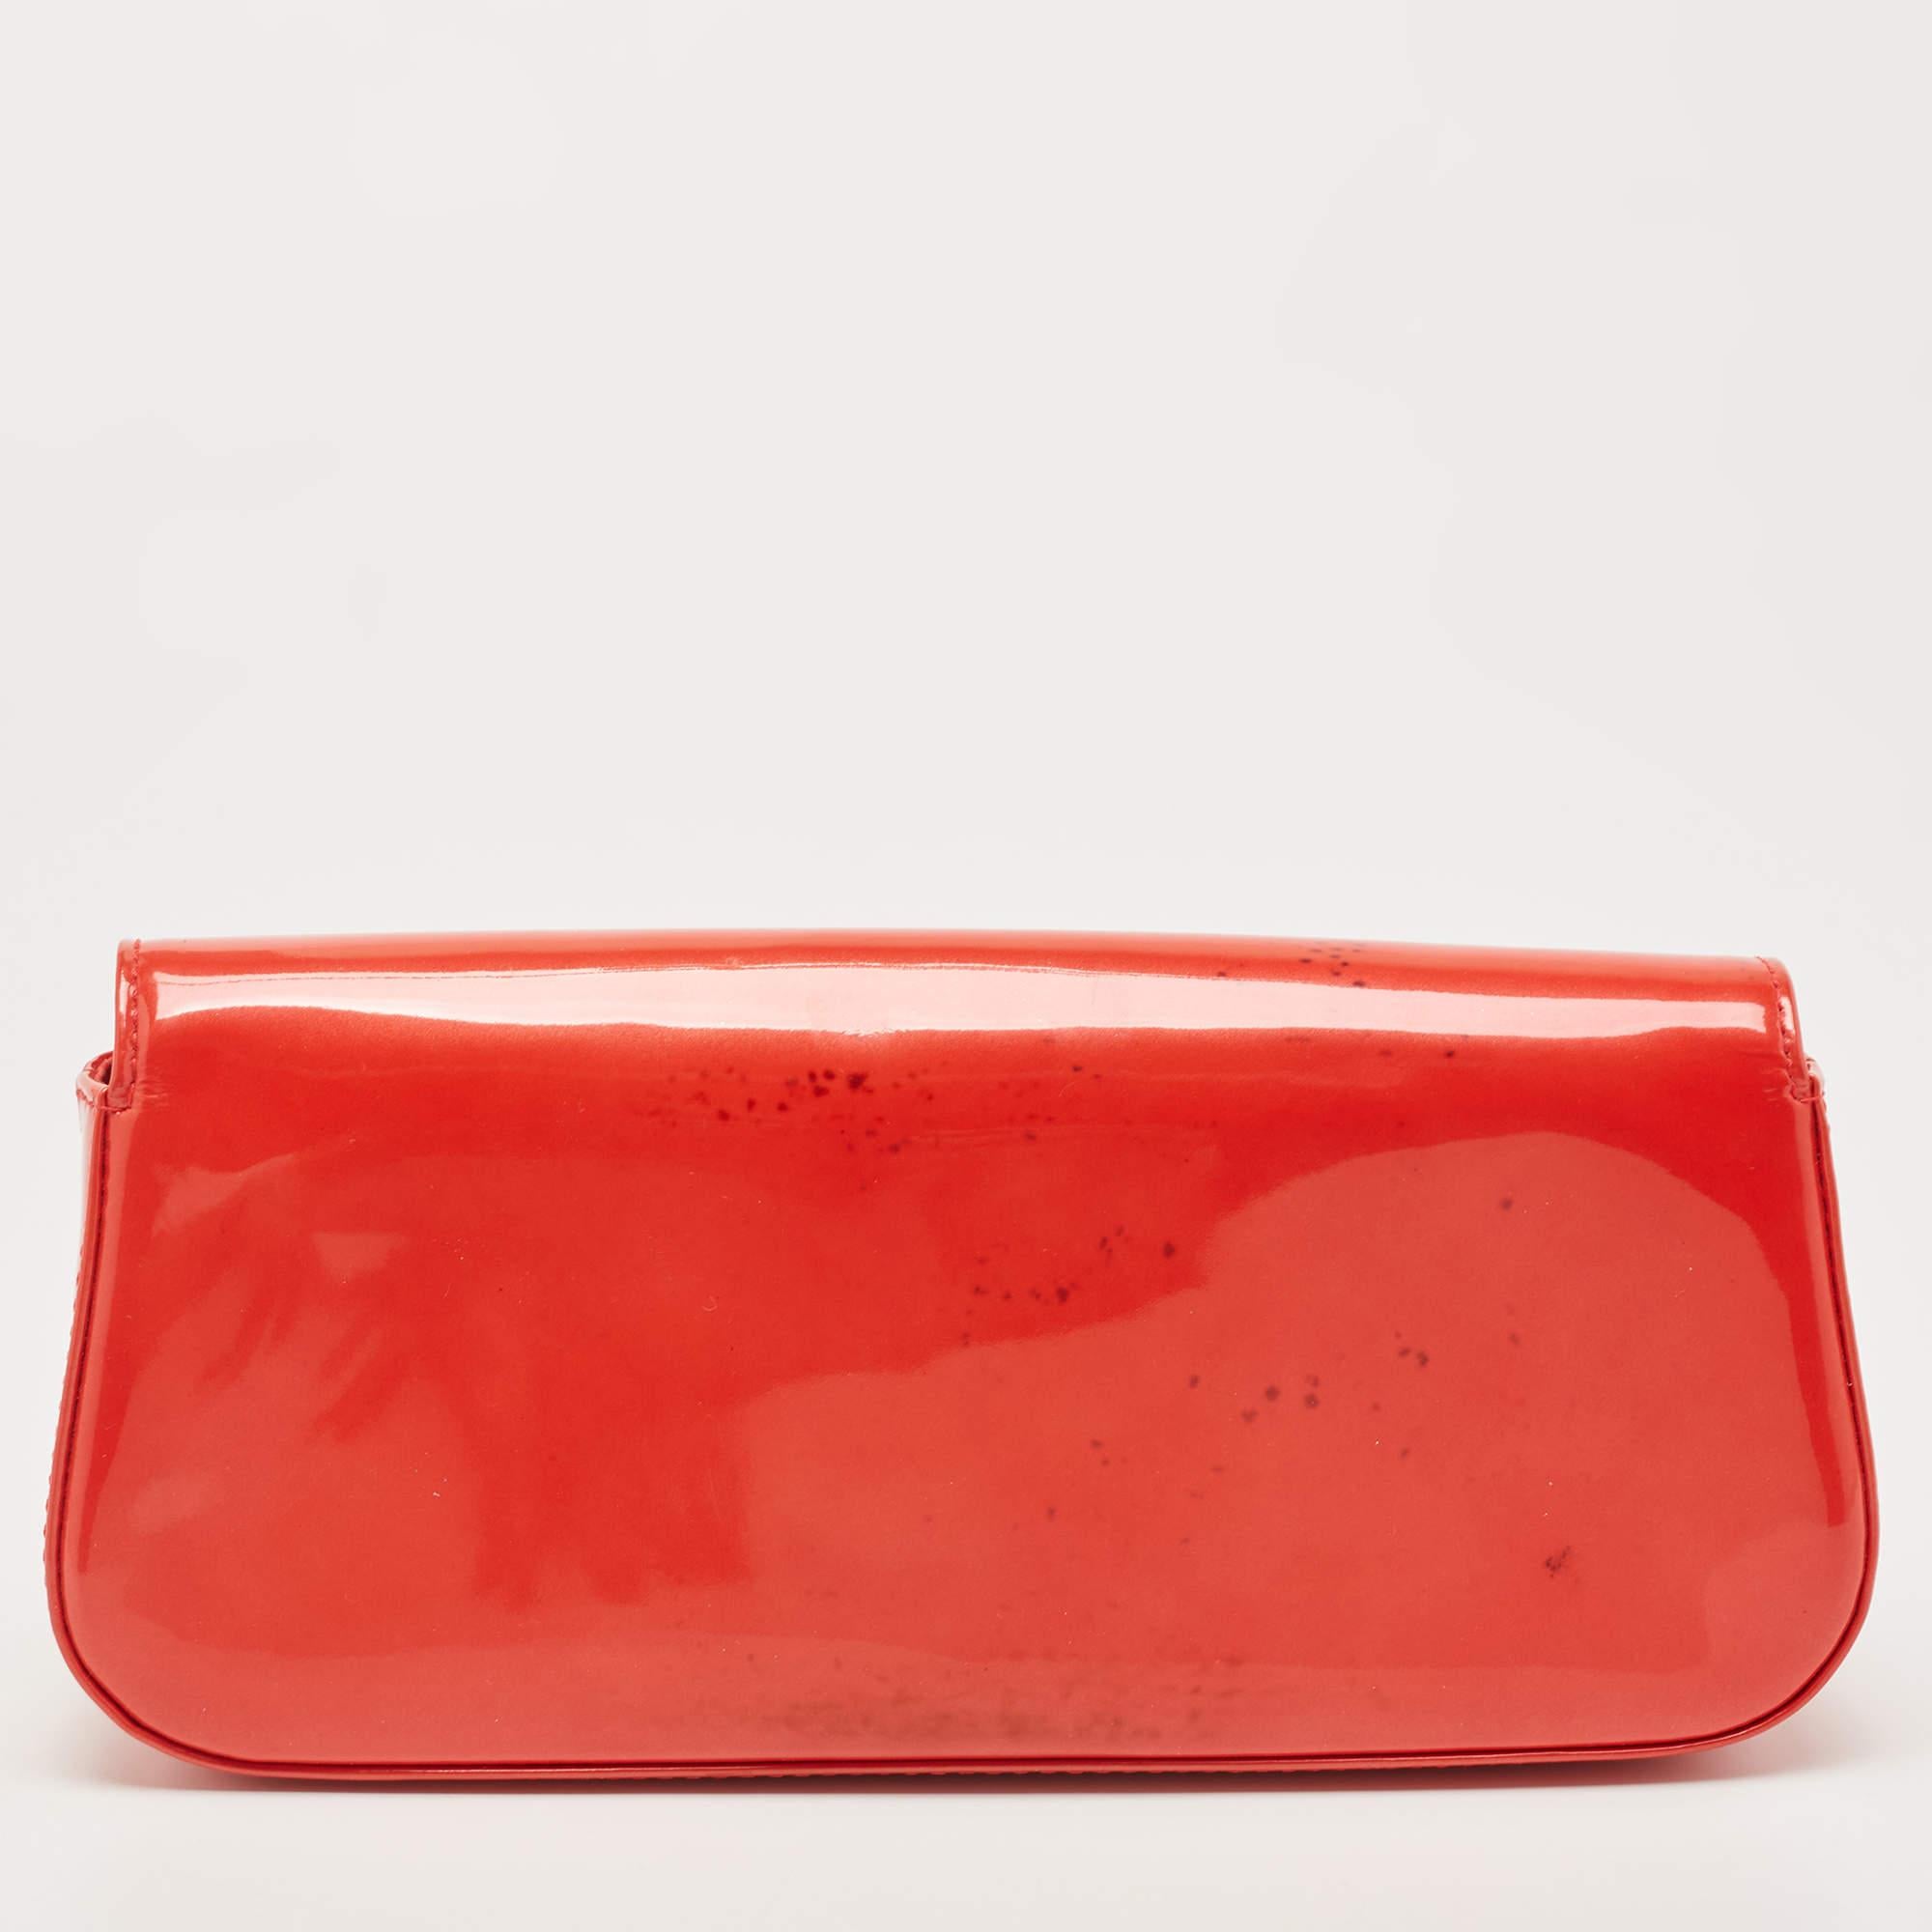 Well-crafted and overflowing with style, this Sobe clutch is from Louis Vuitton. It has a patent leather exterior, a fabric interior, and a large LV adorned on the flap. This creation will lift all your gowns and elegant outfits.

Includes: Branded